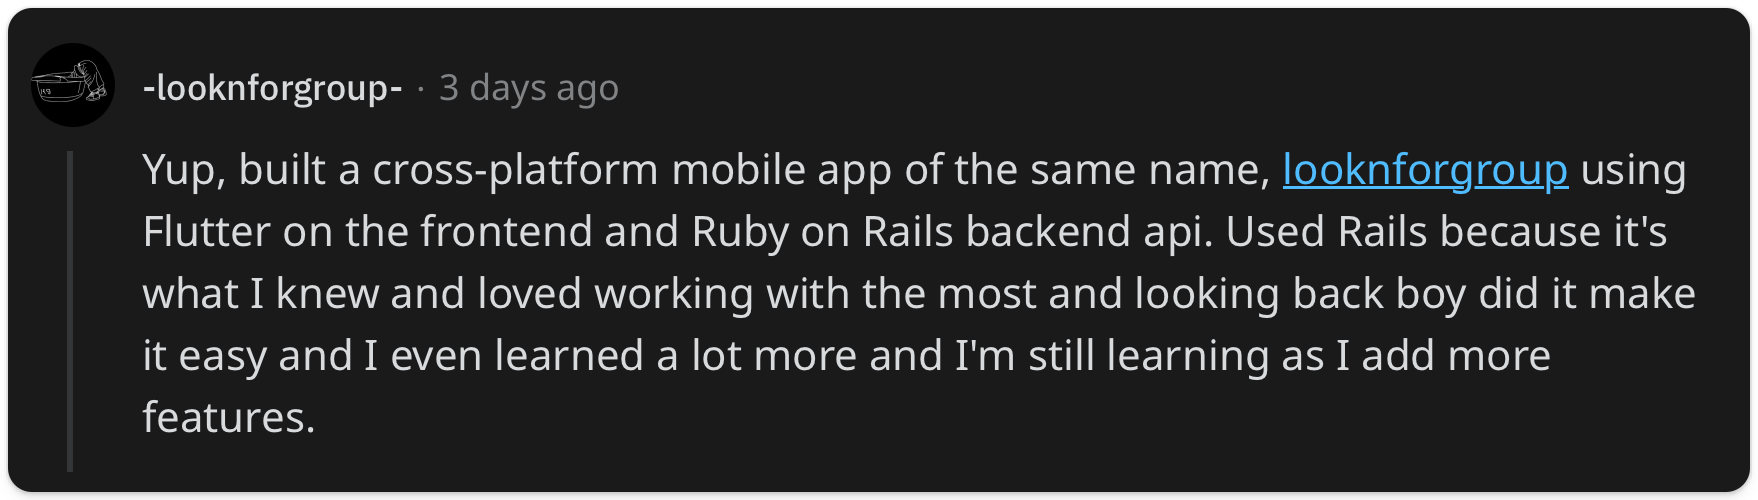 "Yup, built a cross-platform mobile app of the same name, looknforgroup using Flutter on the frontend and Ruby on Rails backend api. Used Rails because it's what I knew and loved working with the most and looking back boy did it make it easy and I even learned a lot more and I'm still learning as I add more features."